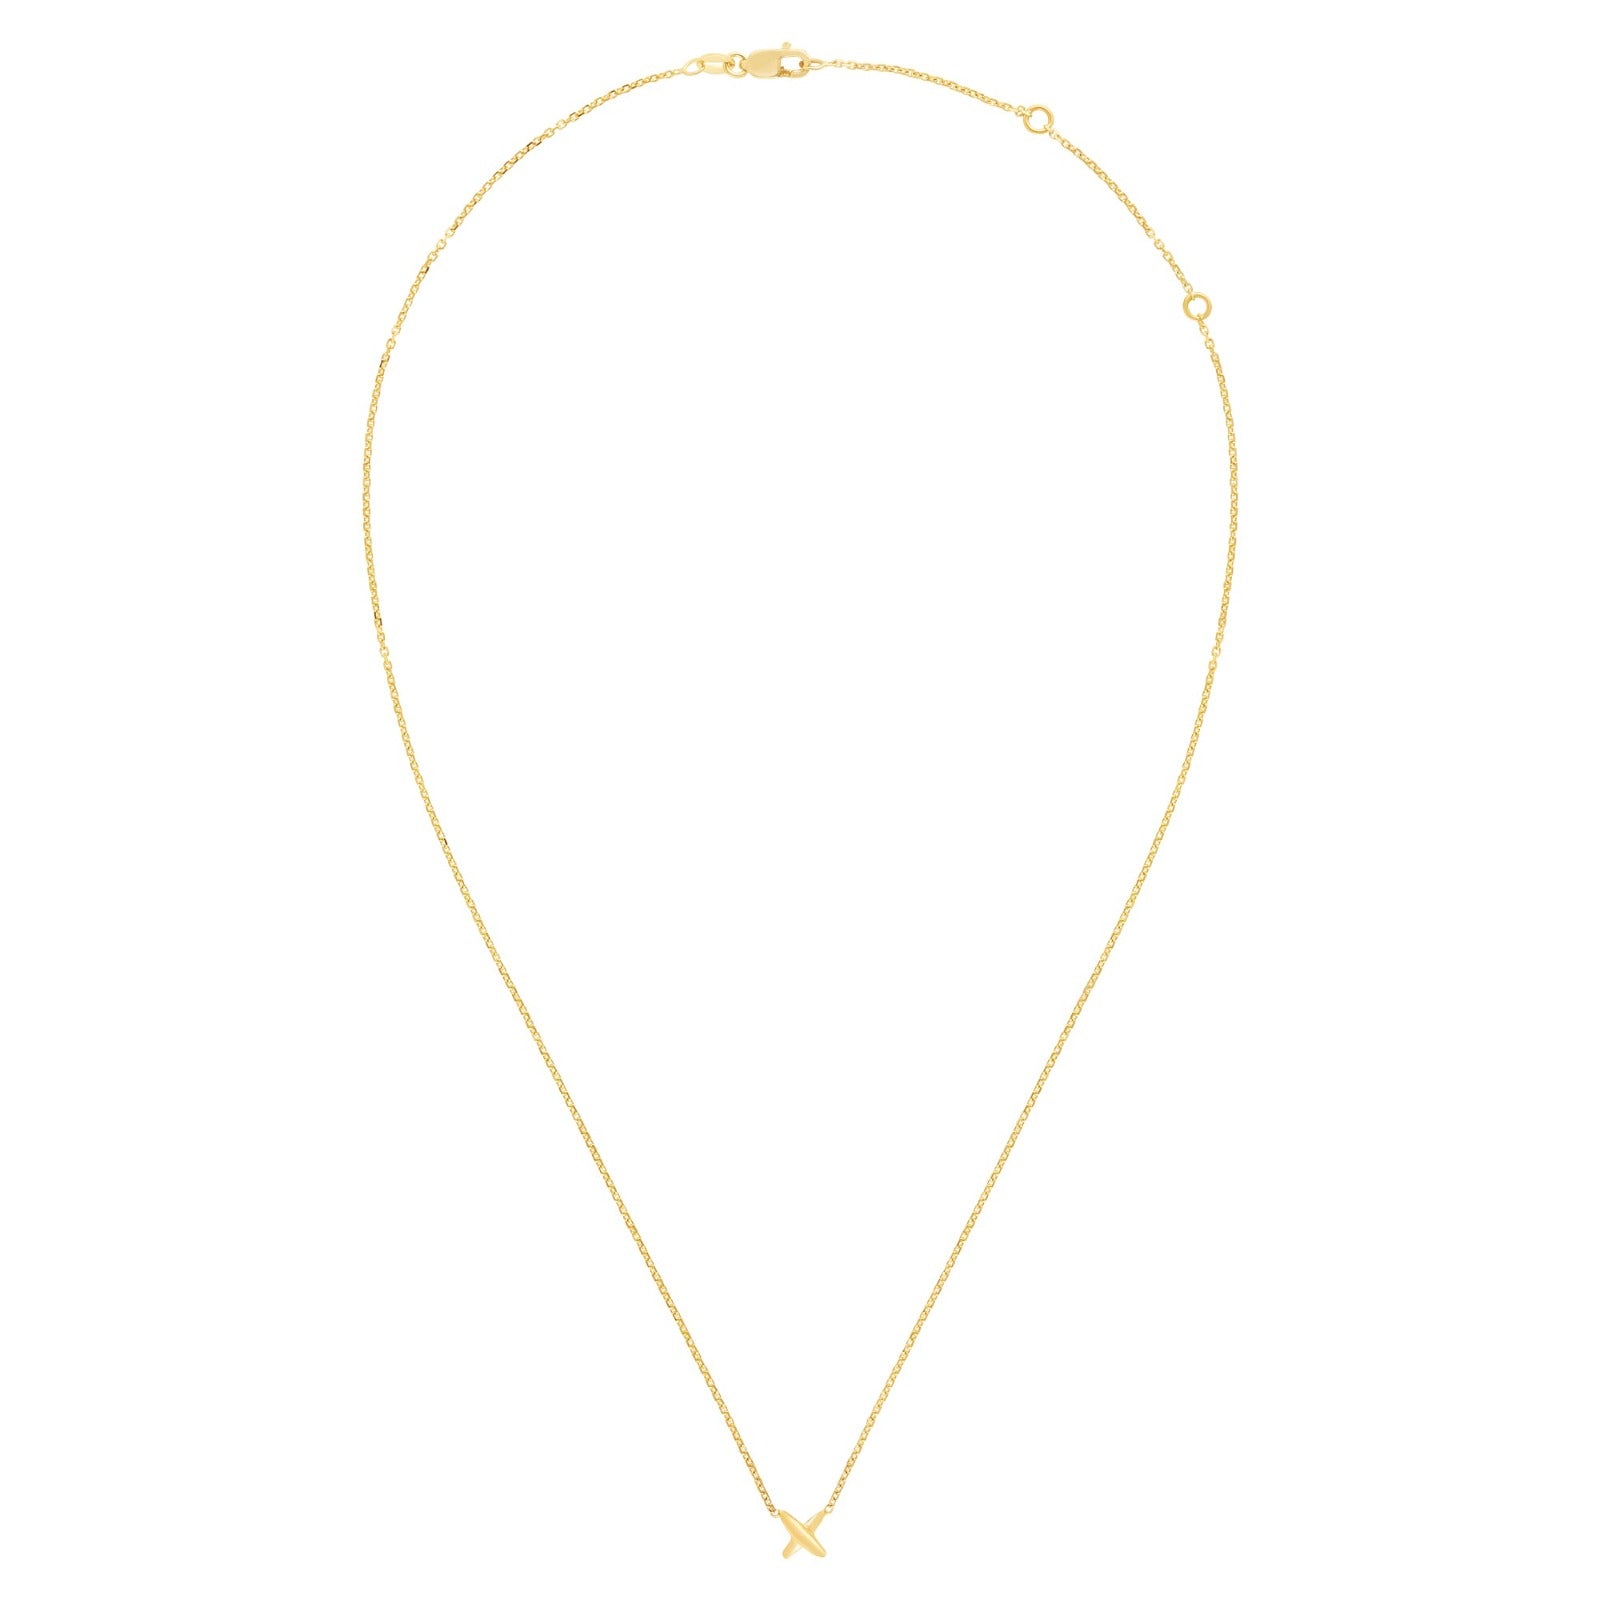 Elegant Gold Chain Necklace with Pearl Decoration